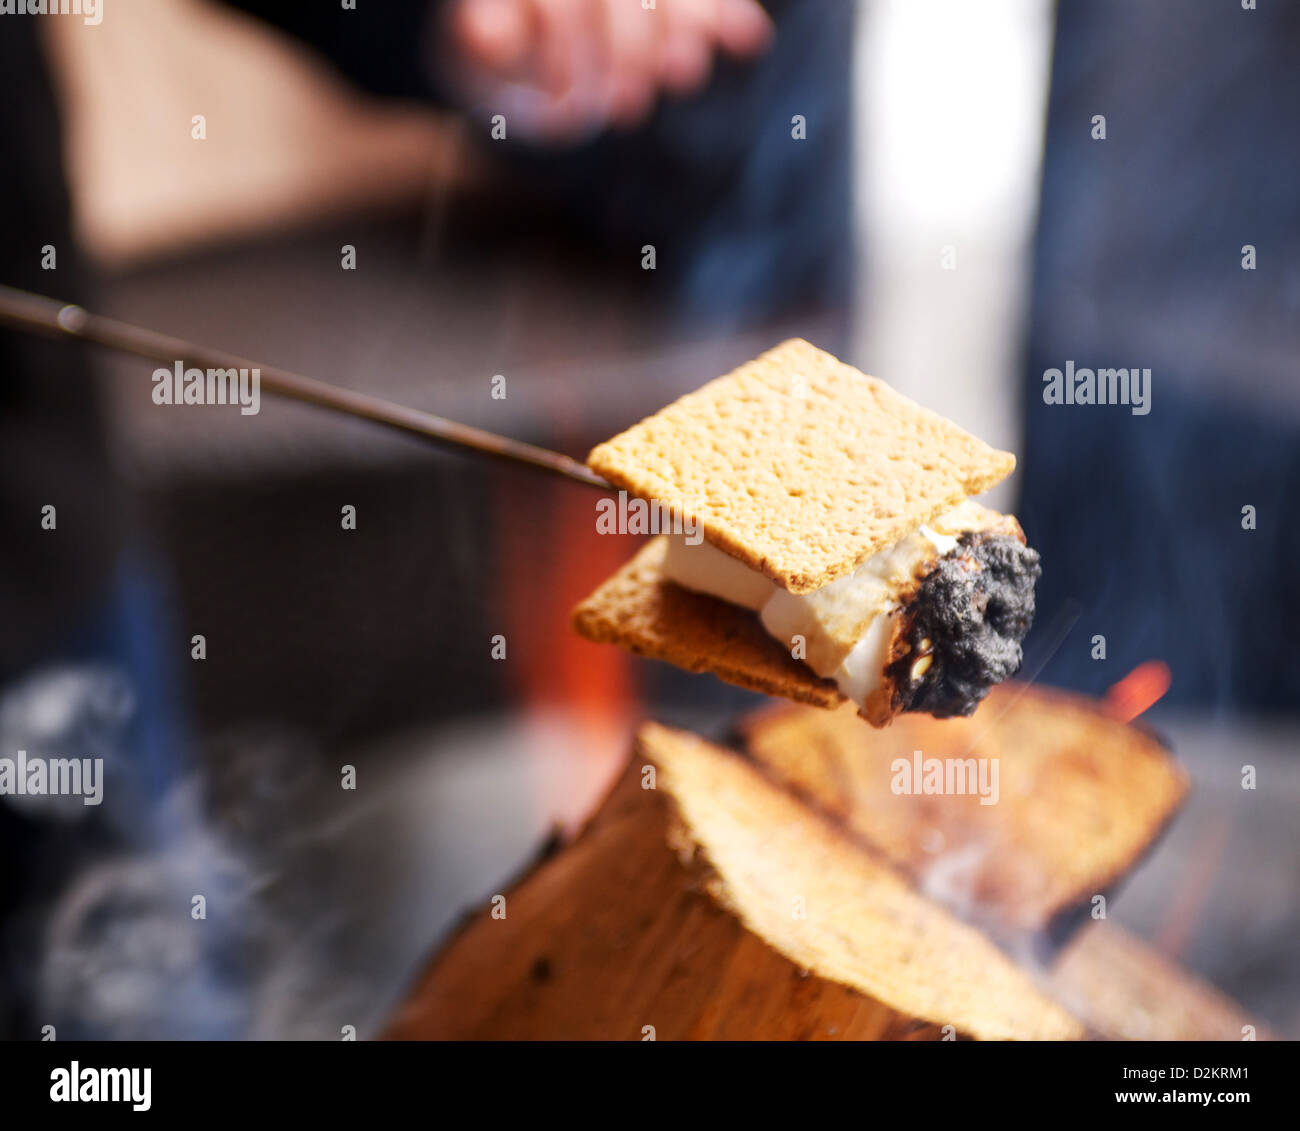 S'mores. Graham cracker, chocolate, and marshmallow, roasted over a campfire. Stock Photo